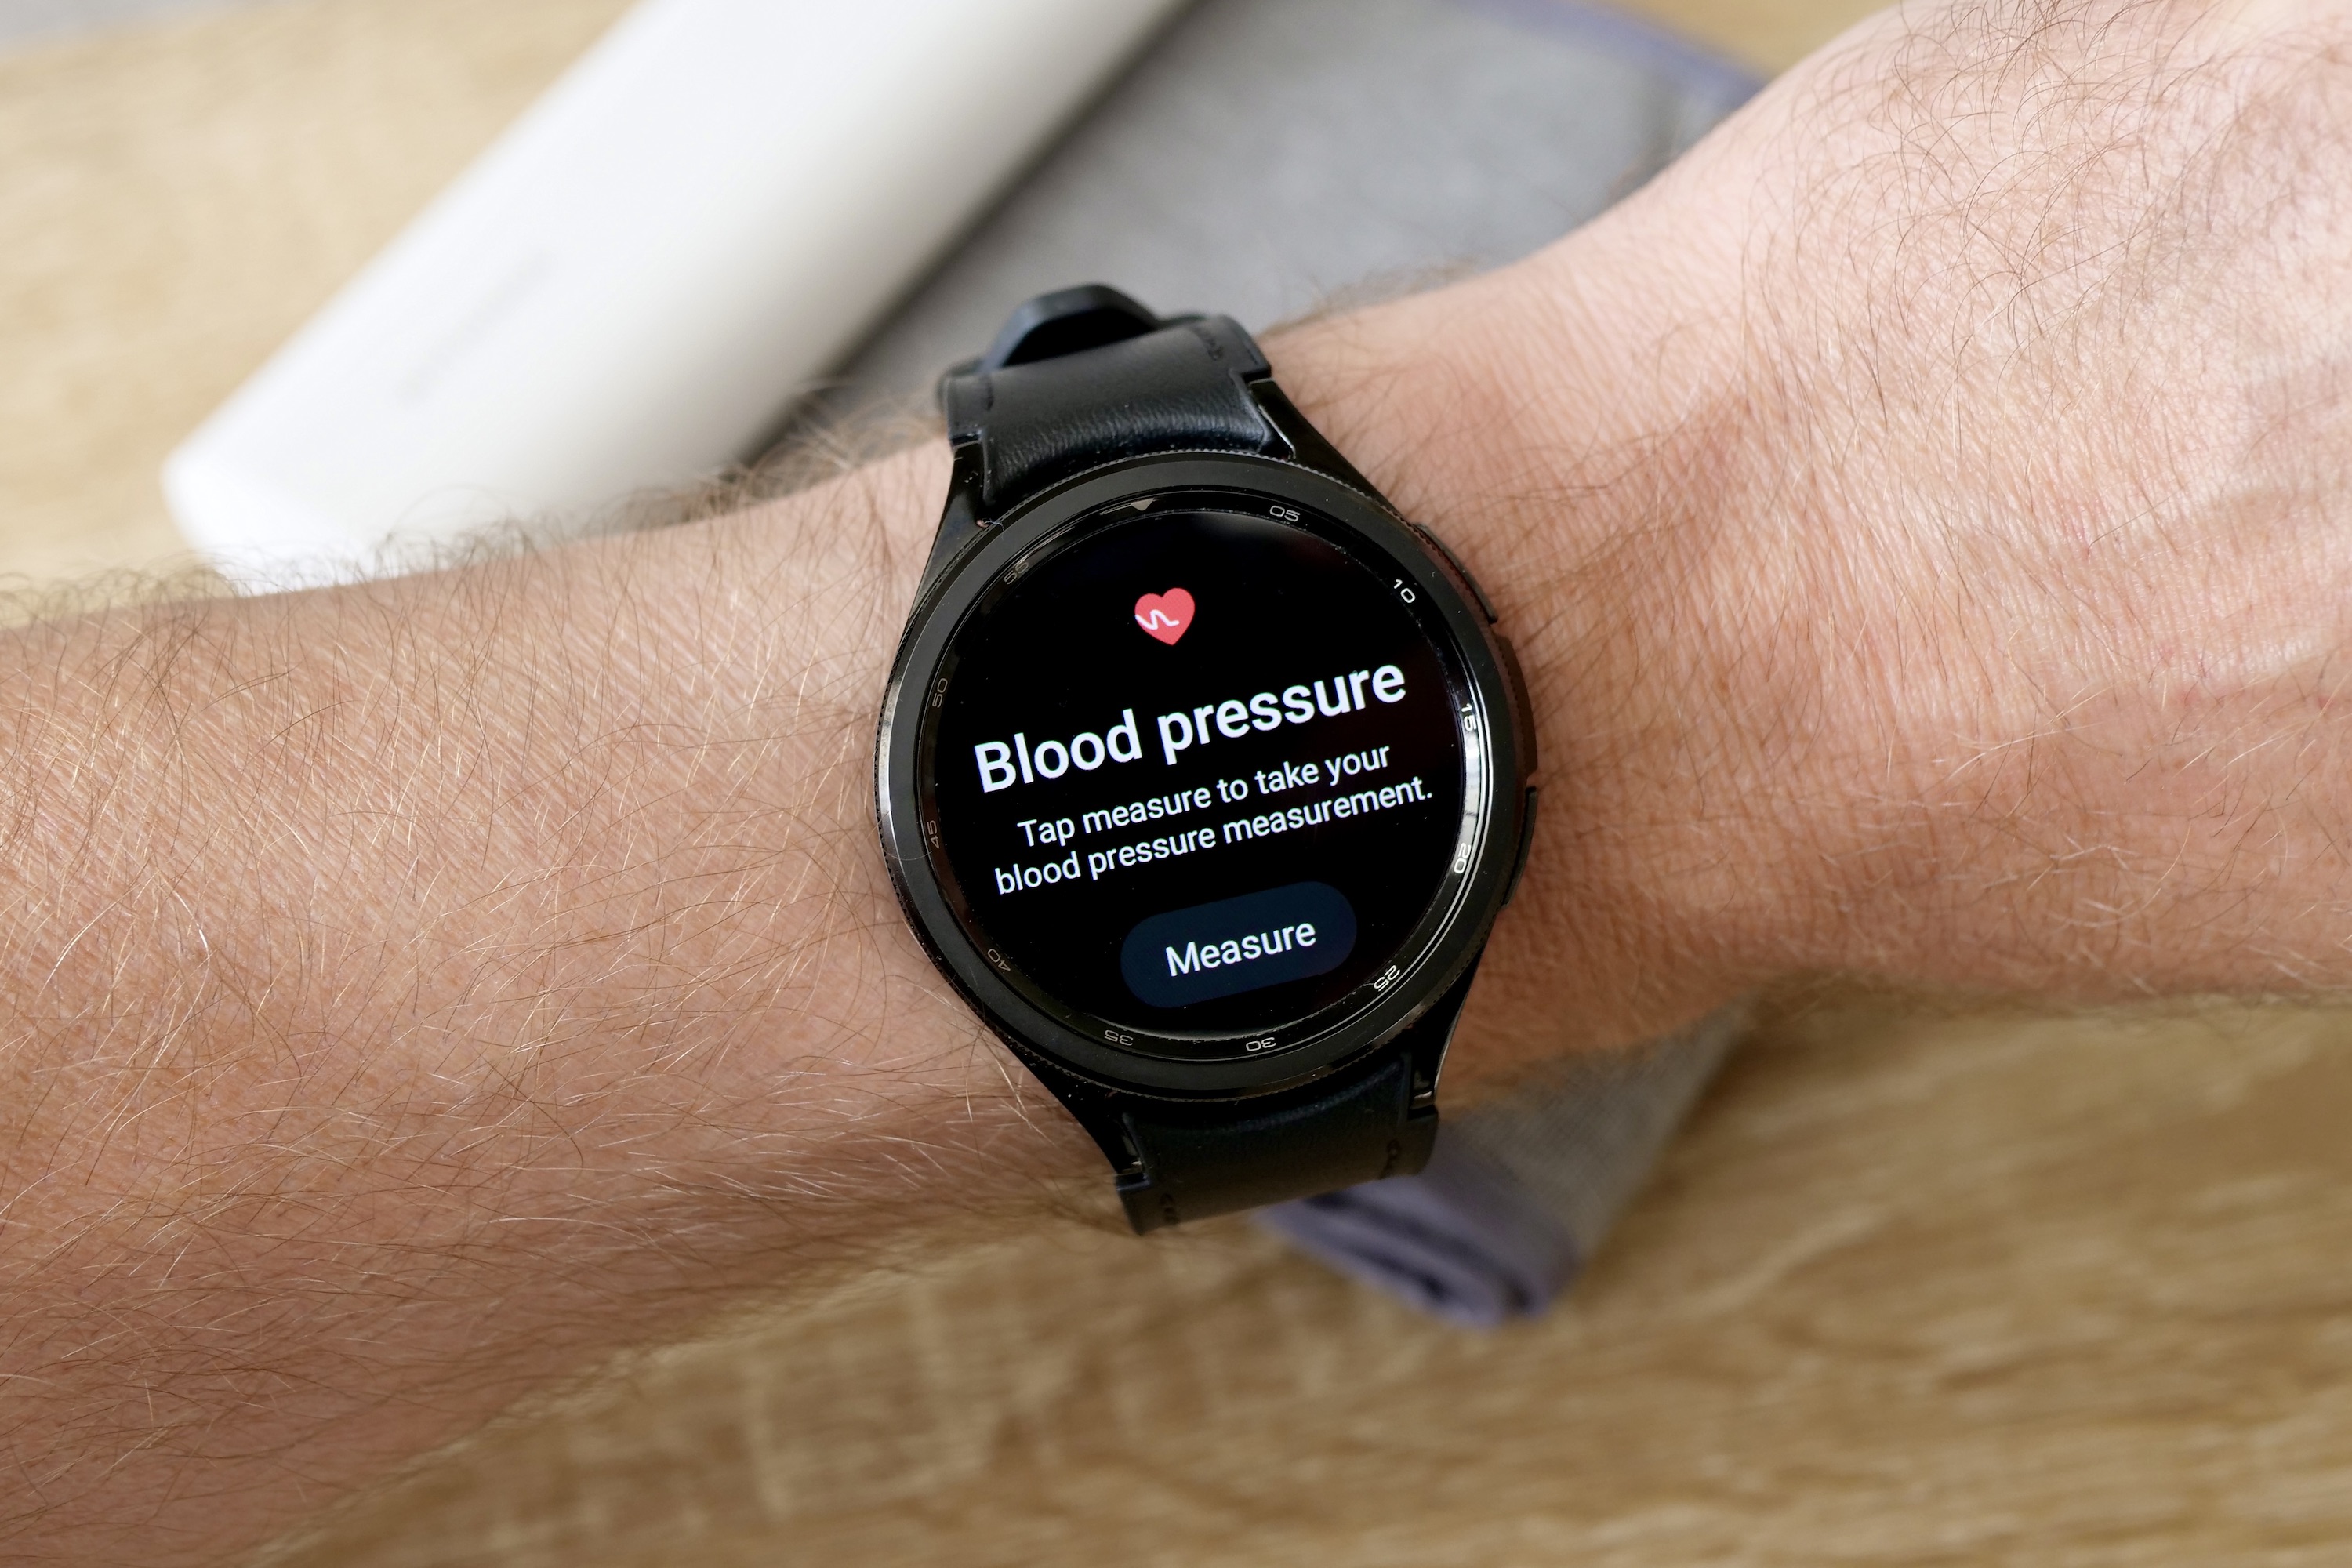 Monitoring blood pressure at home can be tricky. Here's how to do it right.